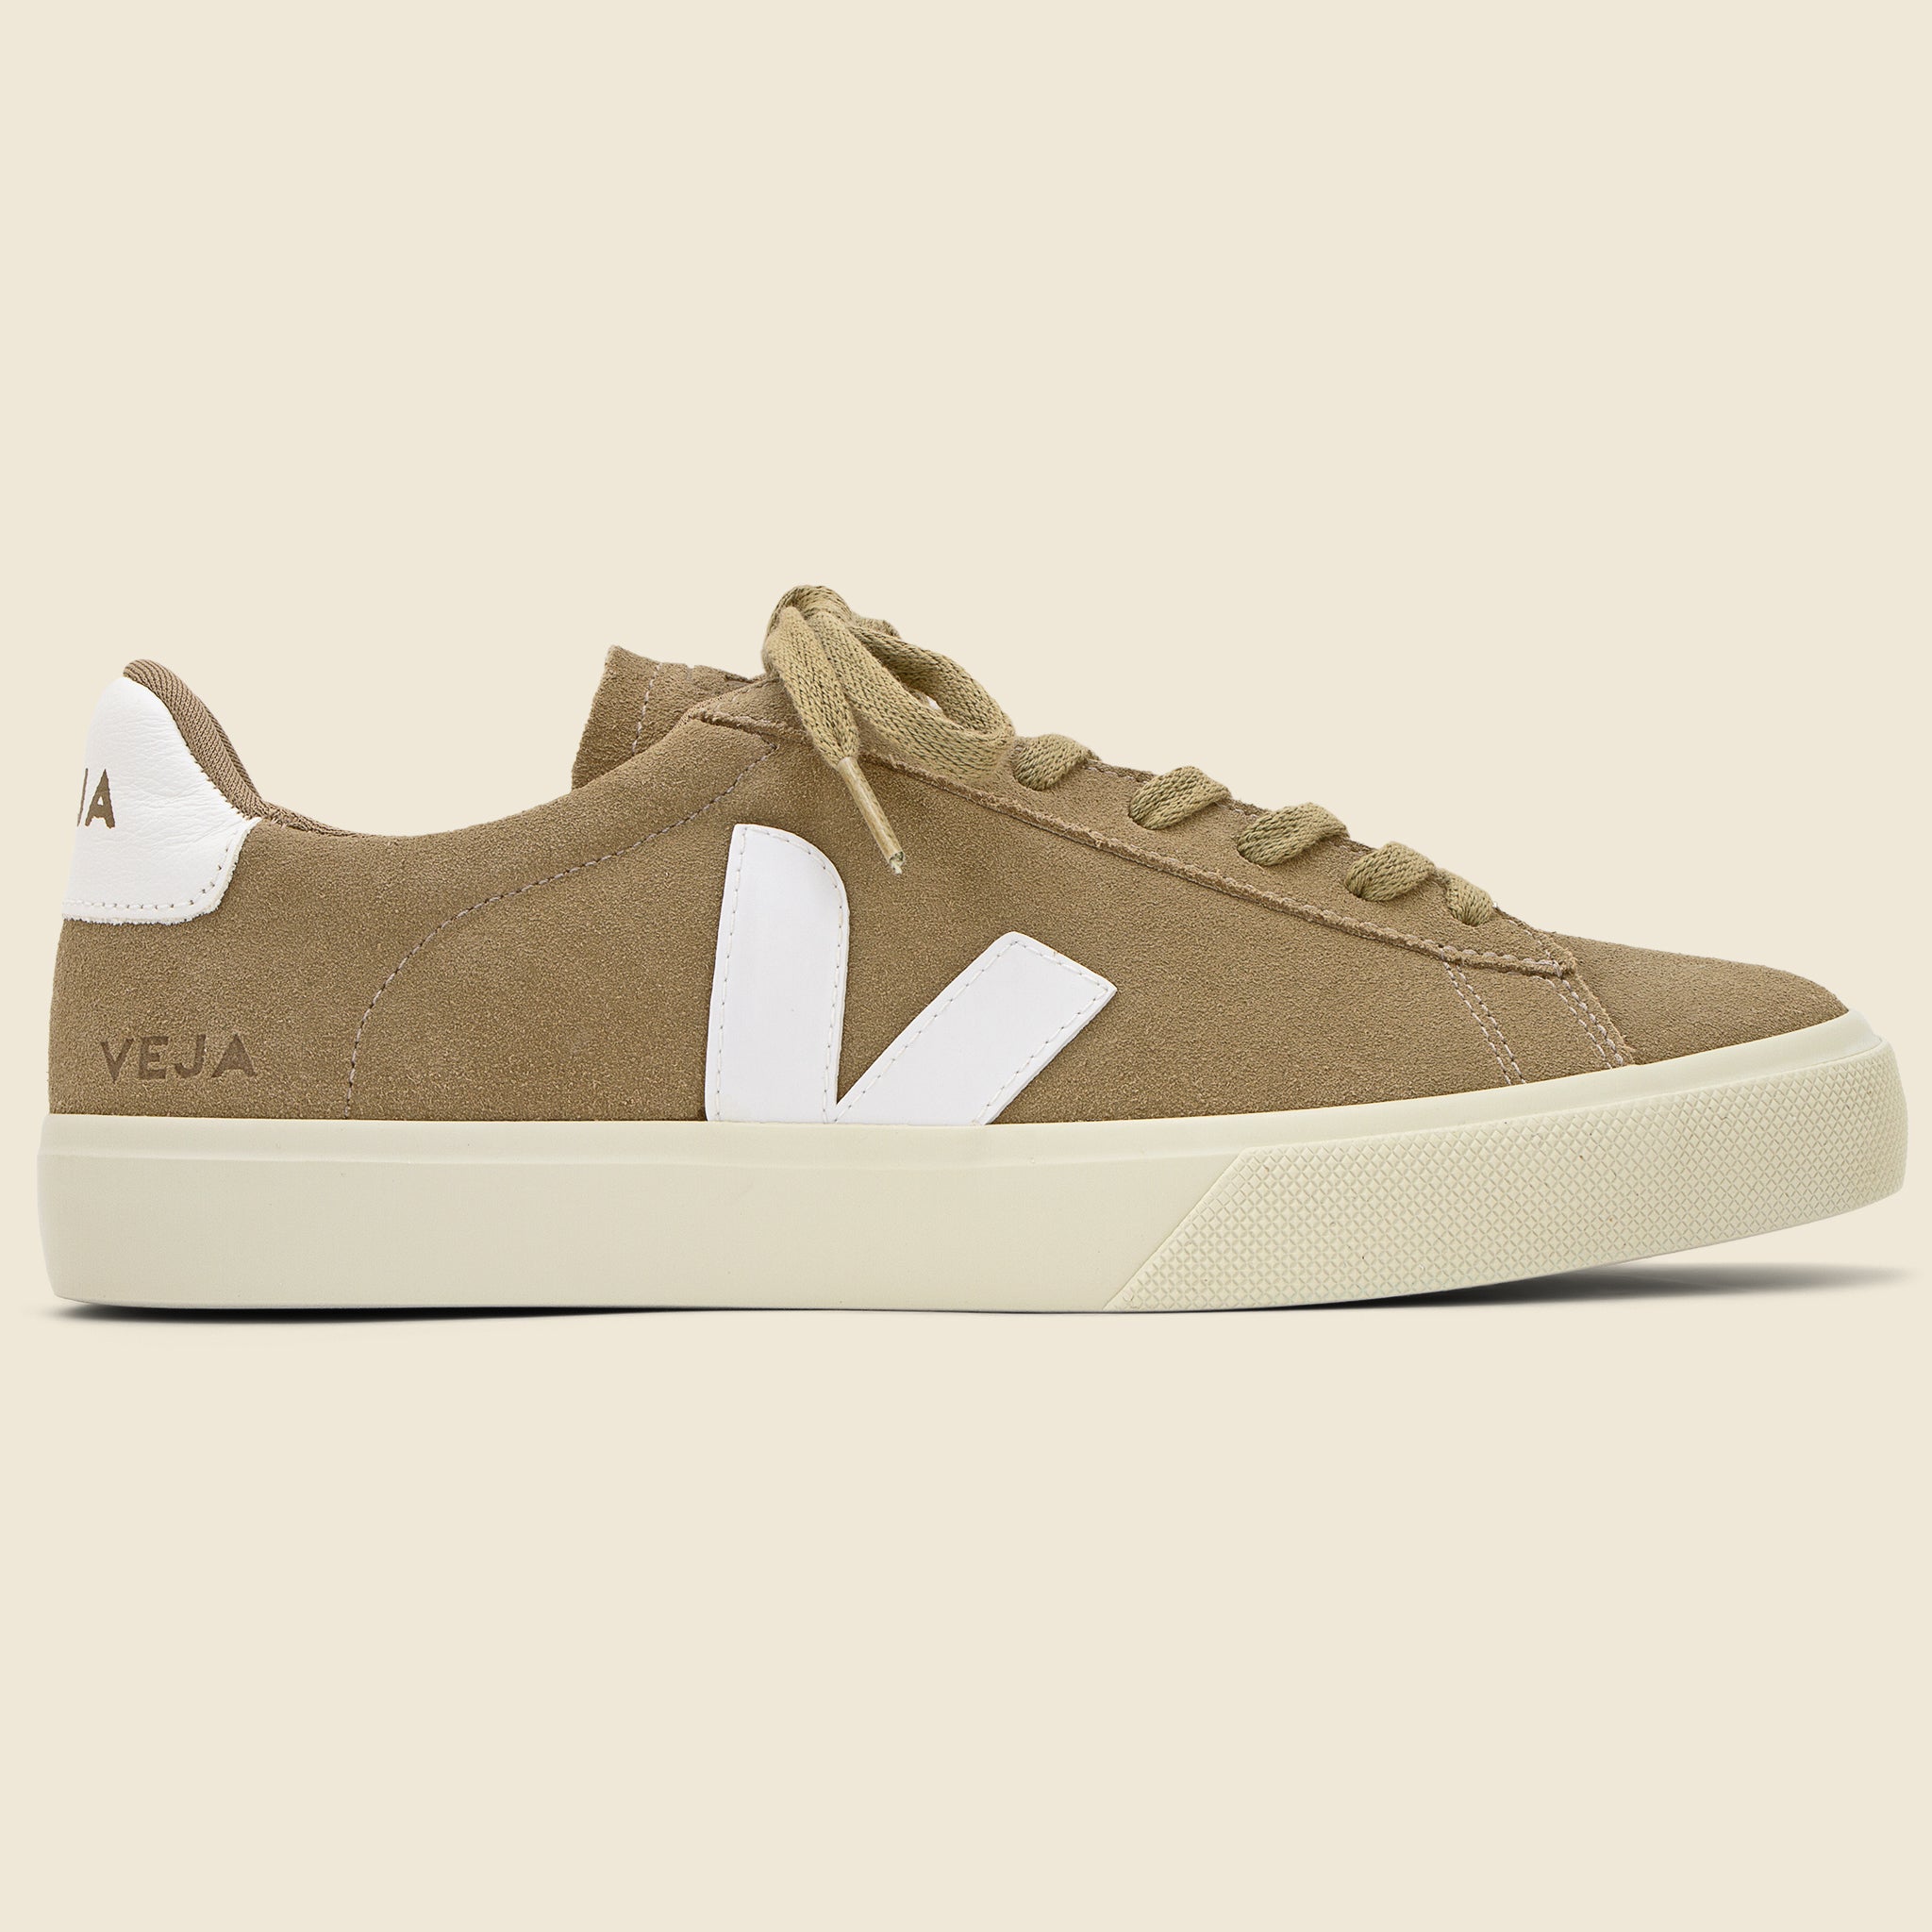 Veja, Campo Suede Sneaker - Dune White